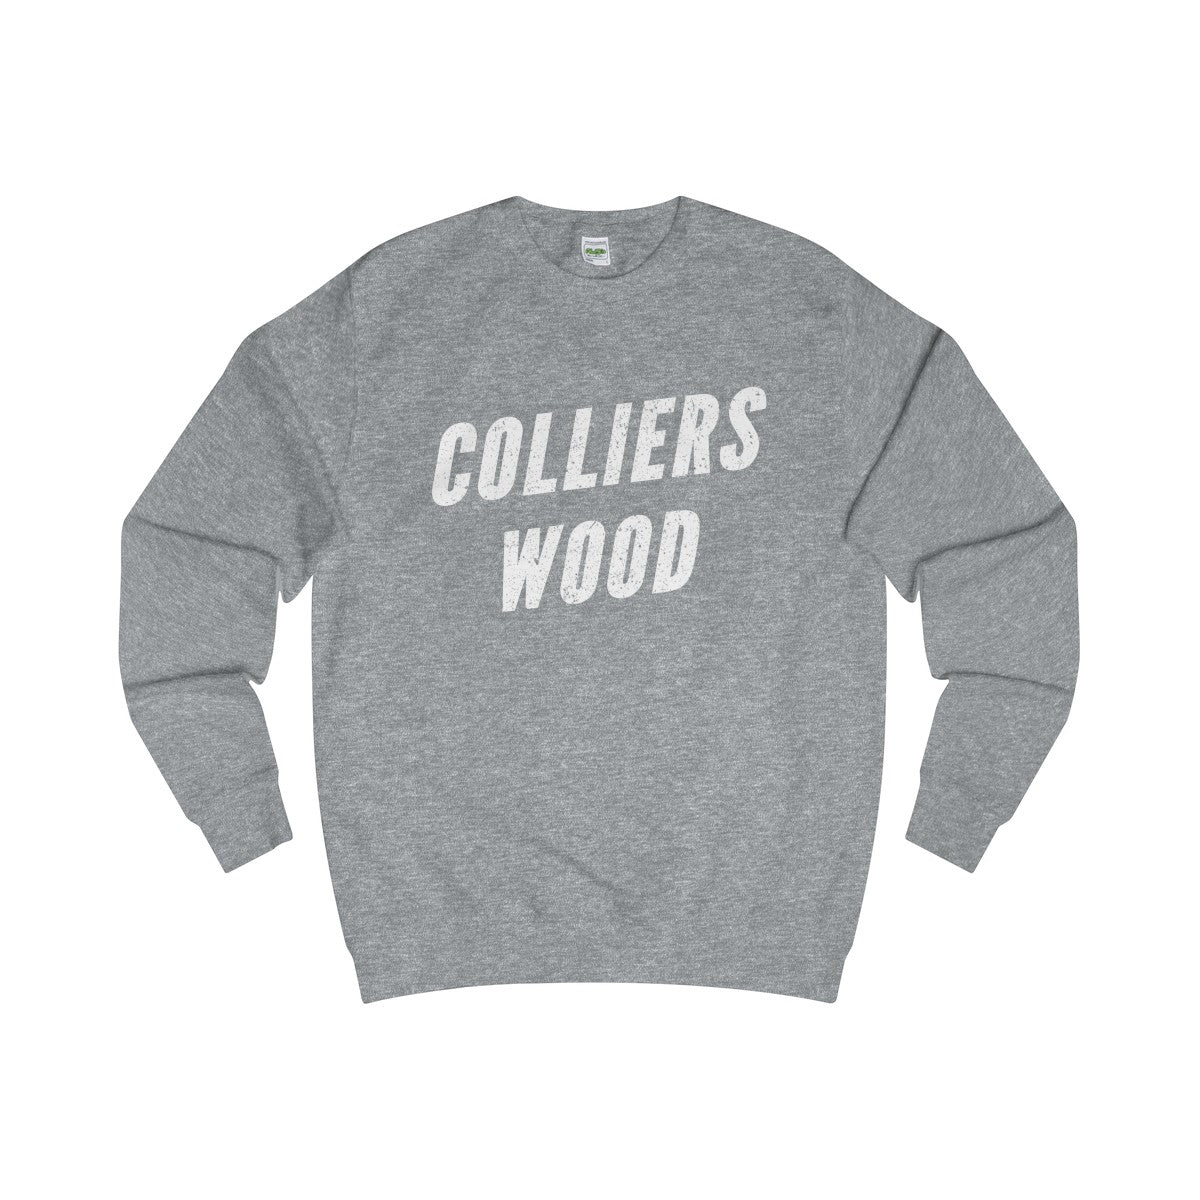 Colliers Wood Sweater